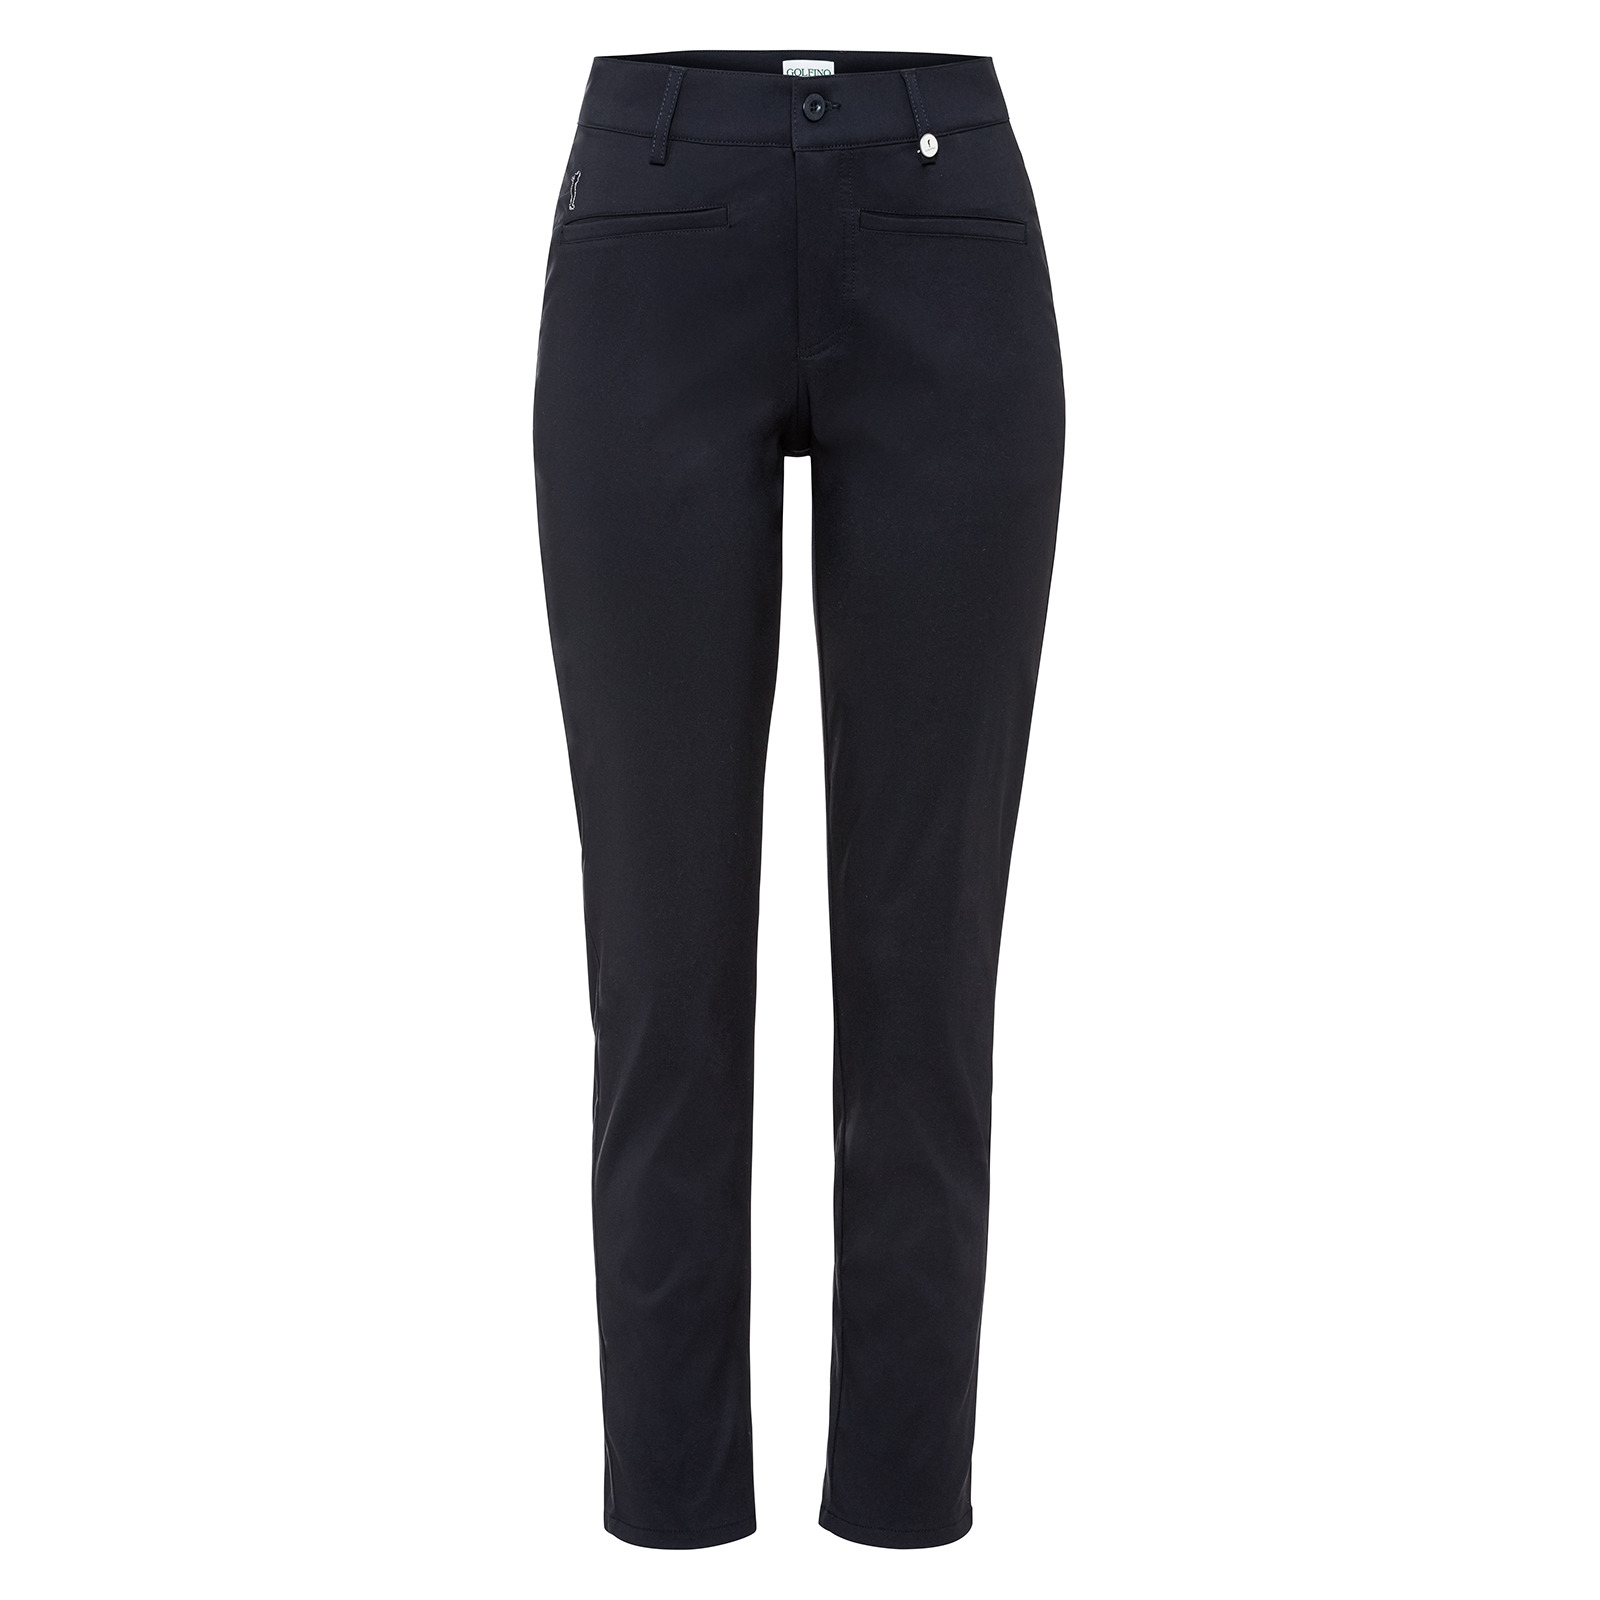 Sporty ladies' stretch 7/8 trousers